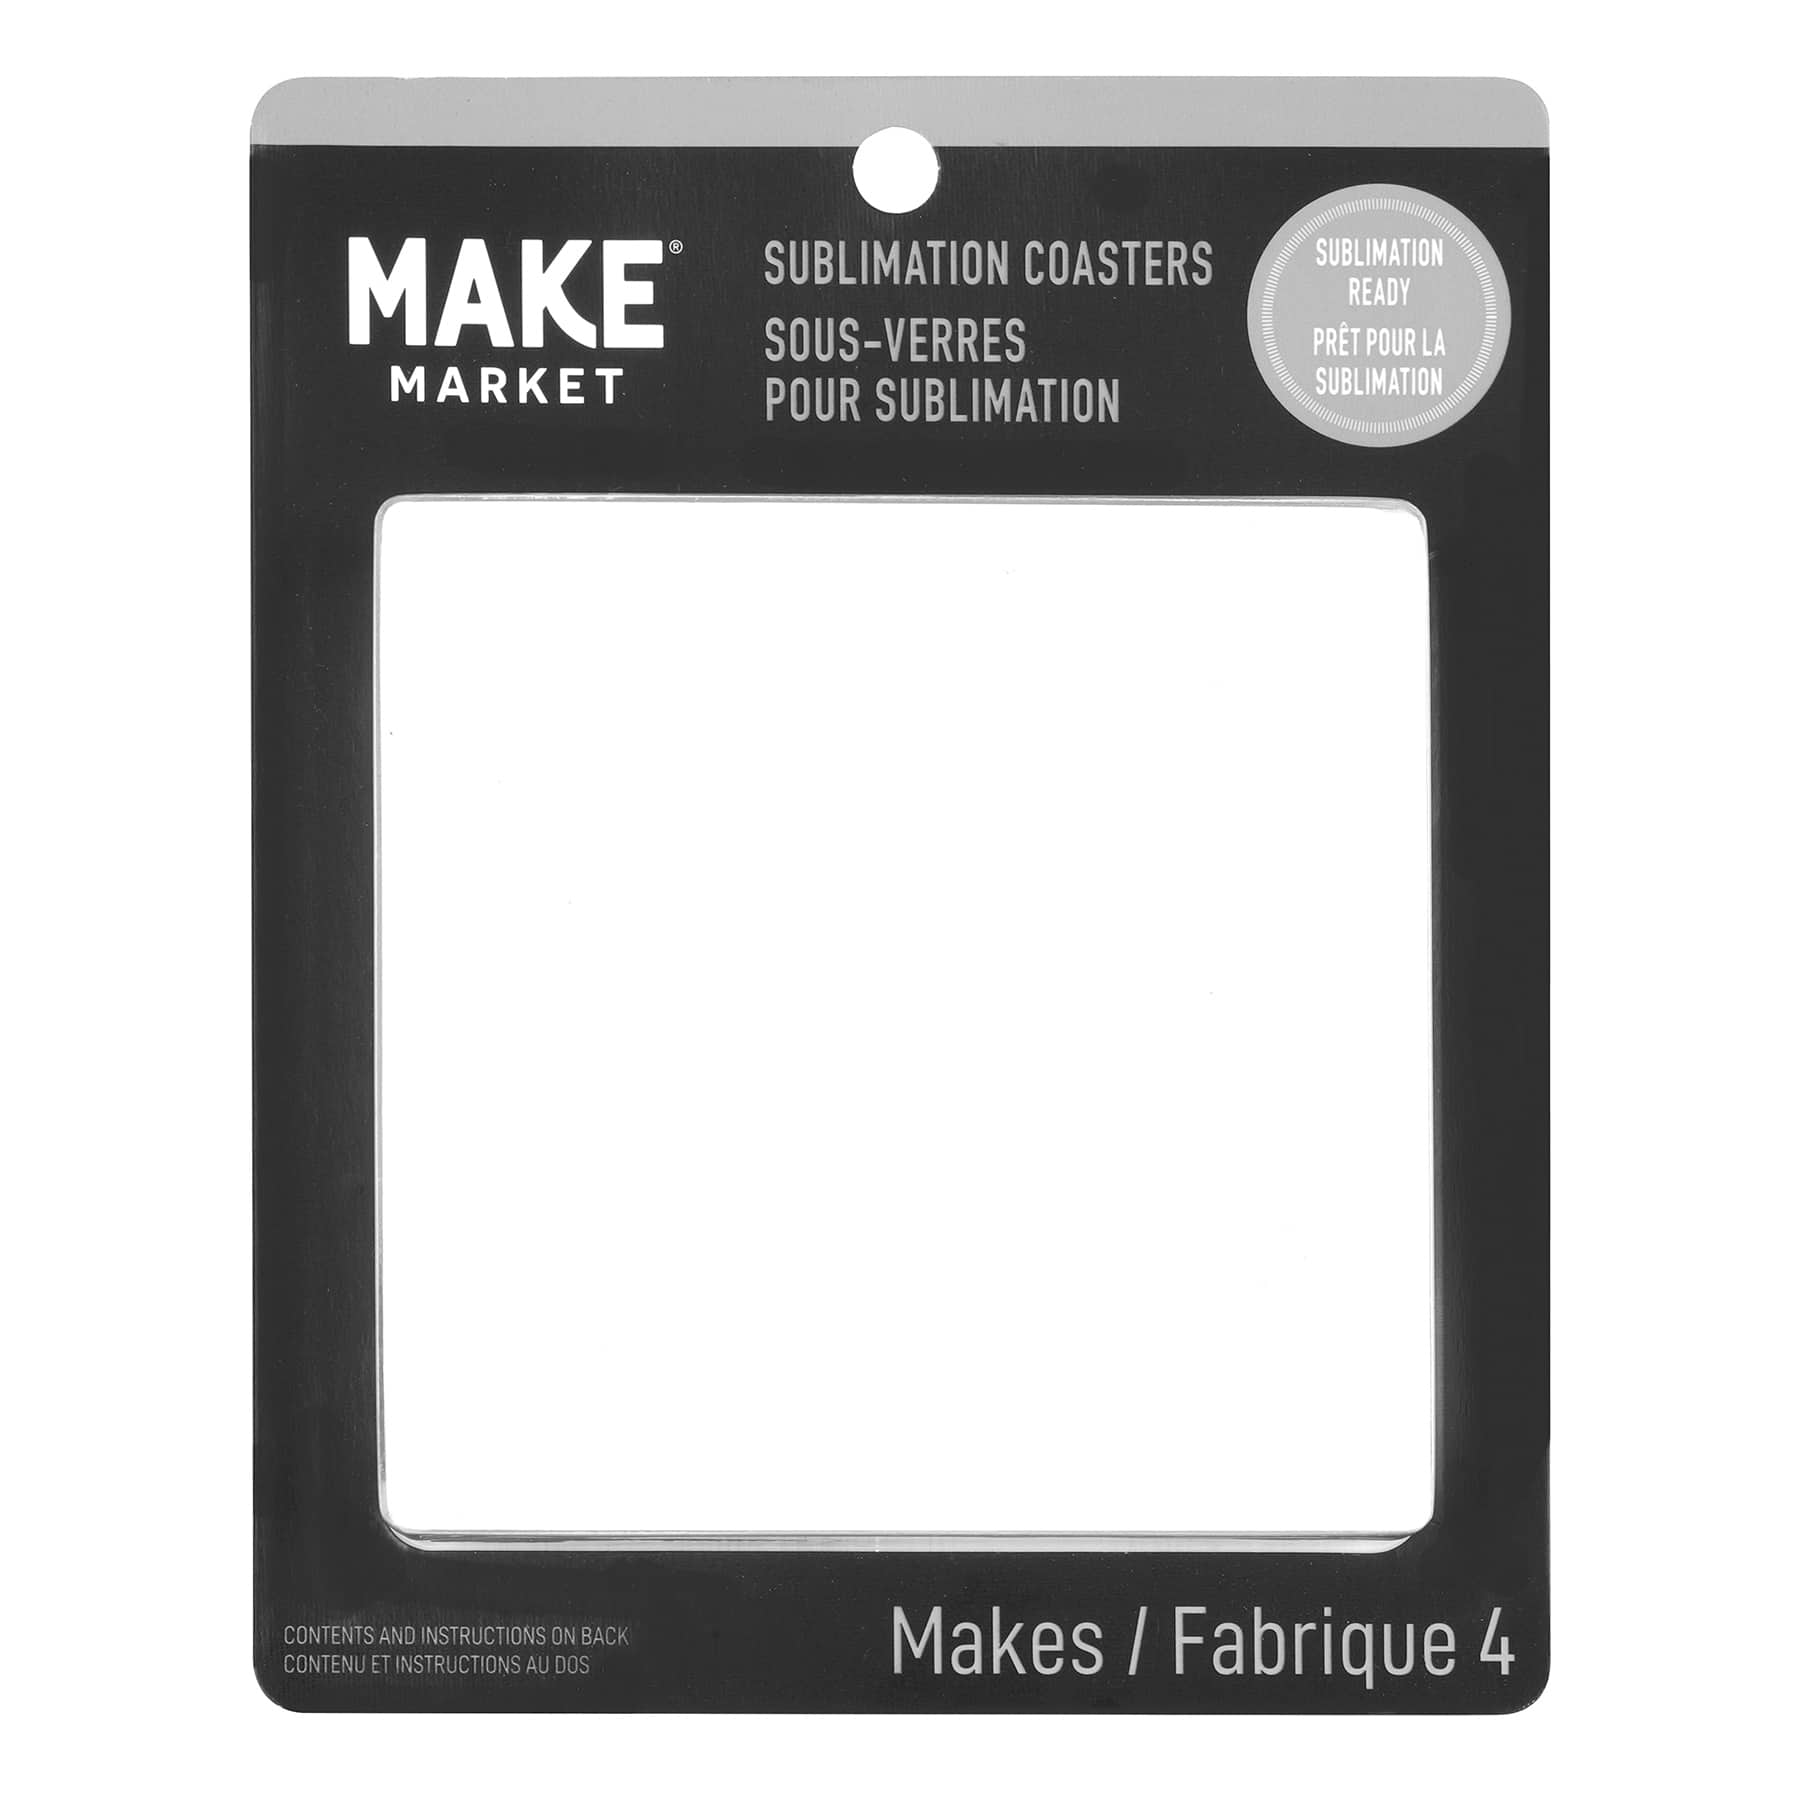 12 Packs: 4 ct. (48 Total) 3.5”; Round Sublimation Coasters by Make Market®